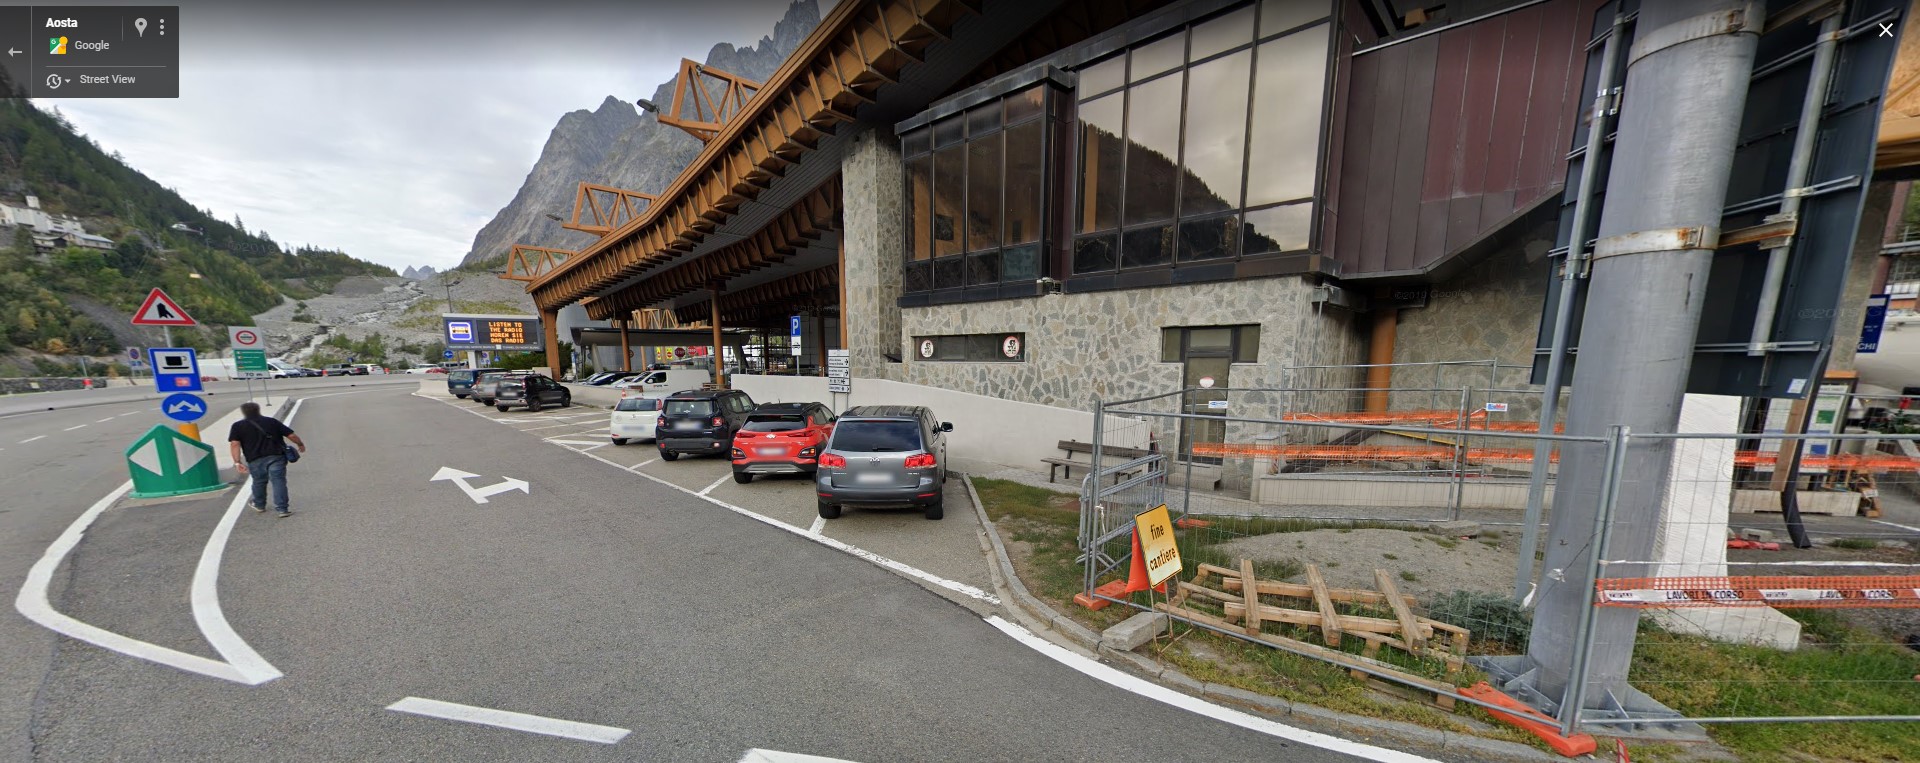 Google Streetview Mont Blanc tunnel compare